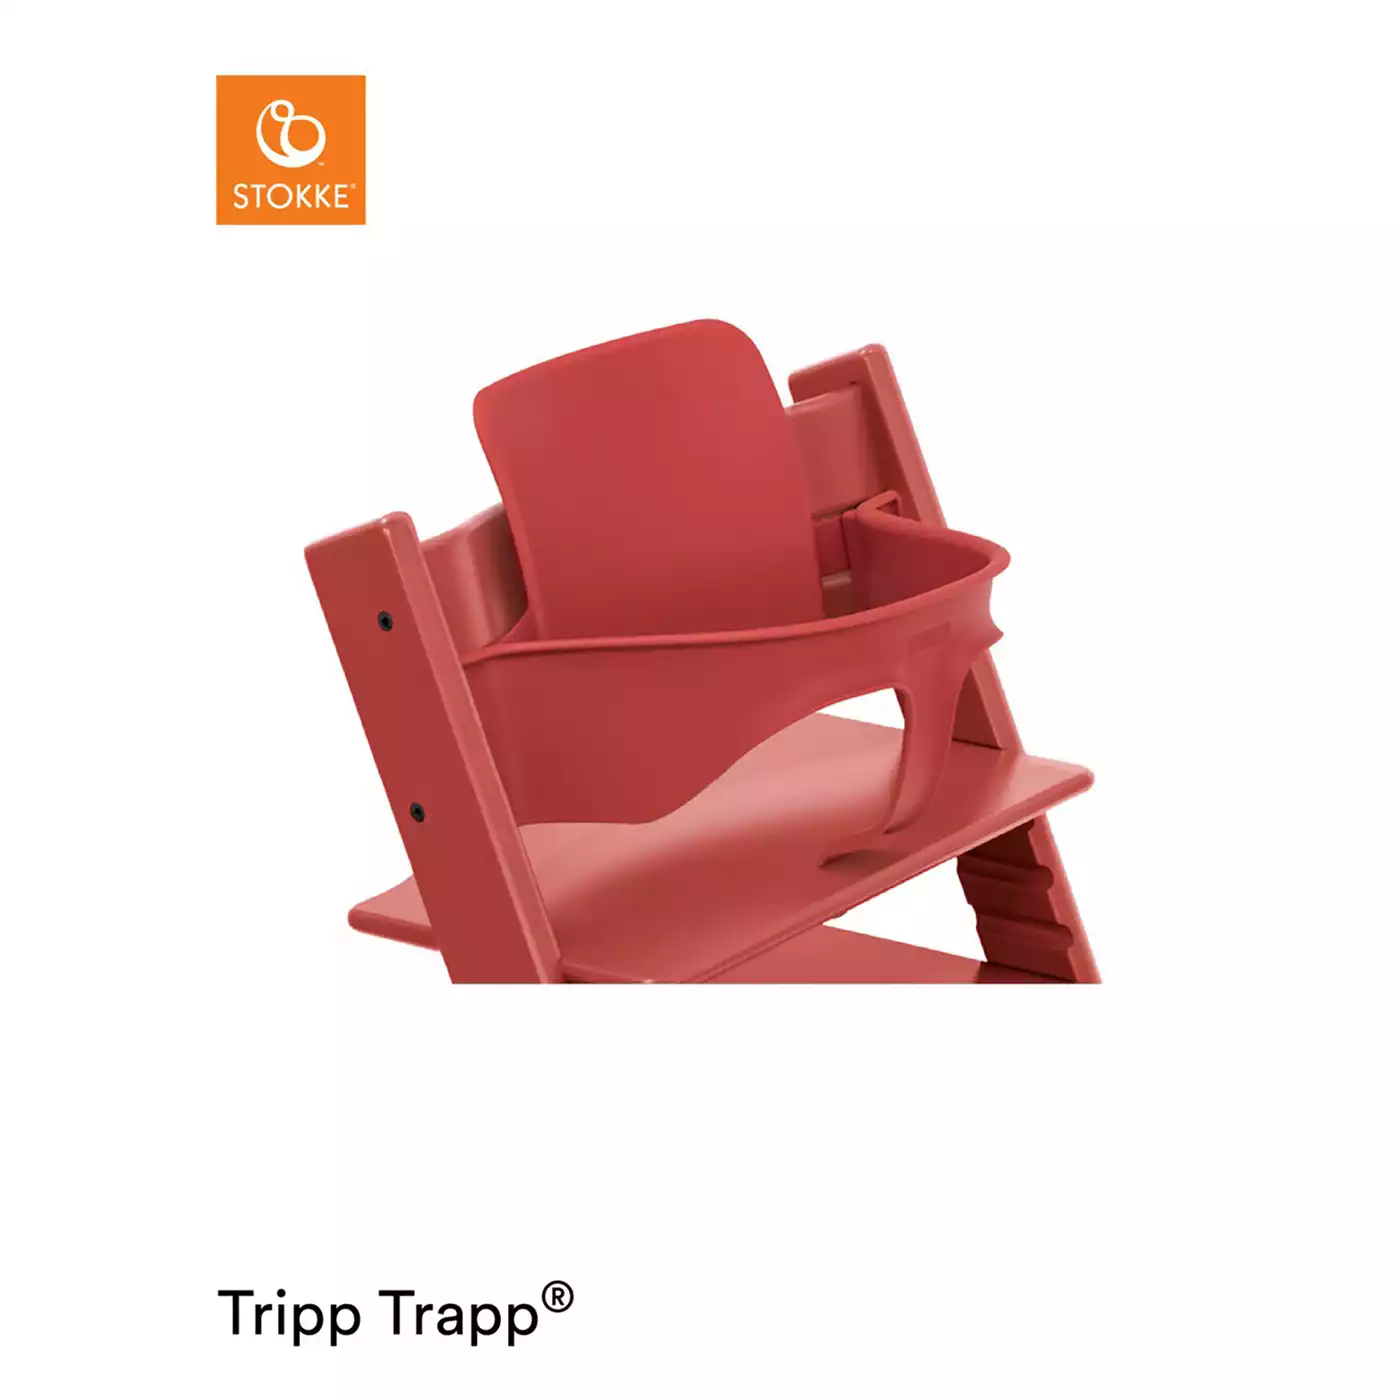 Tripp Trapp® Baby Set Warm Red STOKKE Rot 2000578900502 3